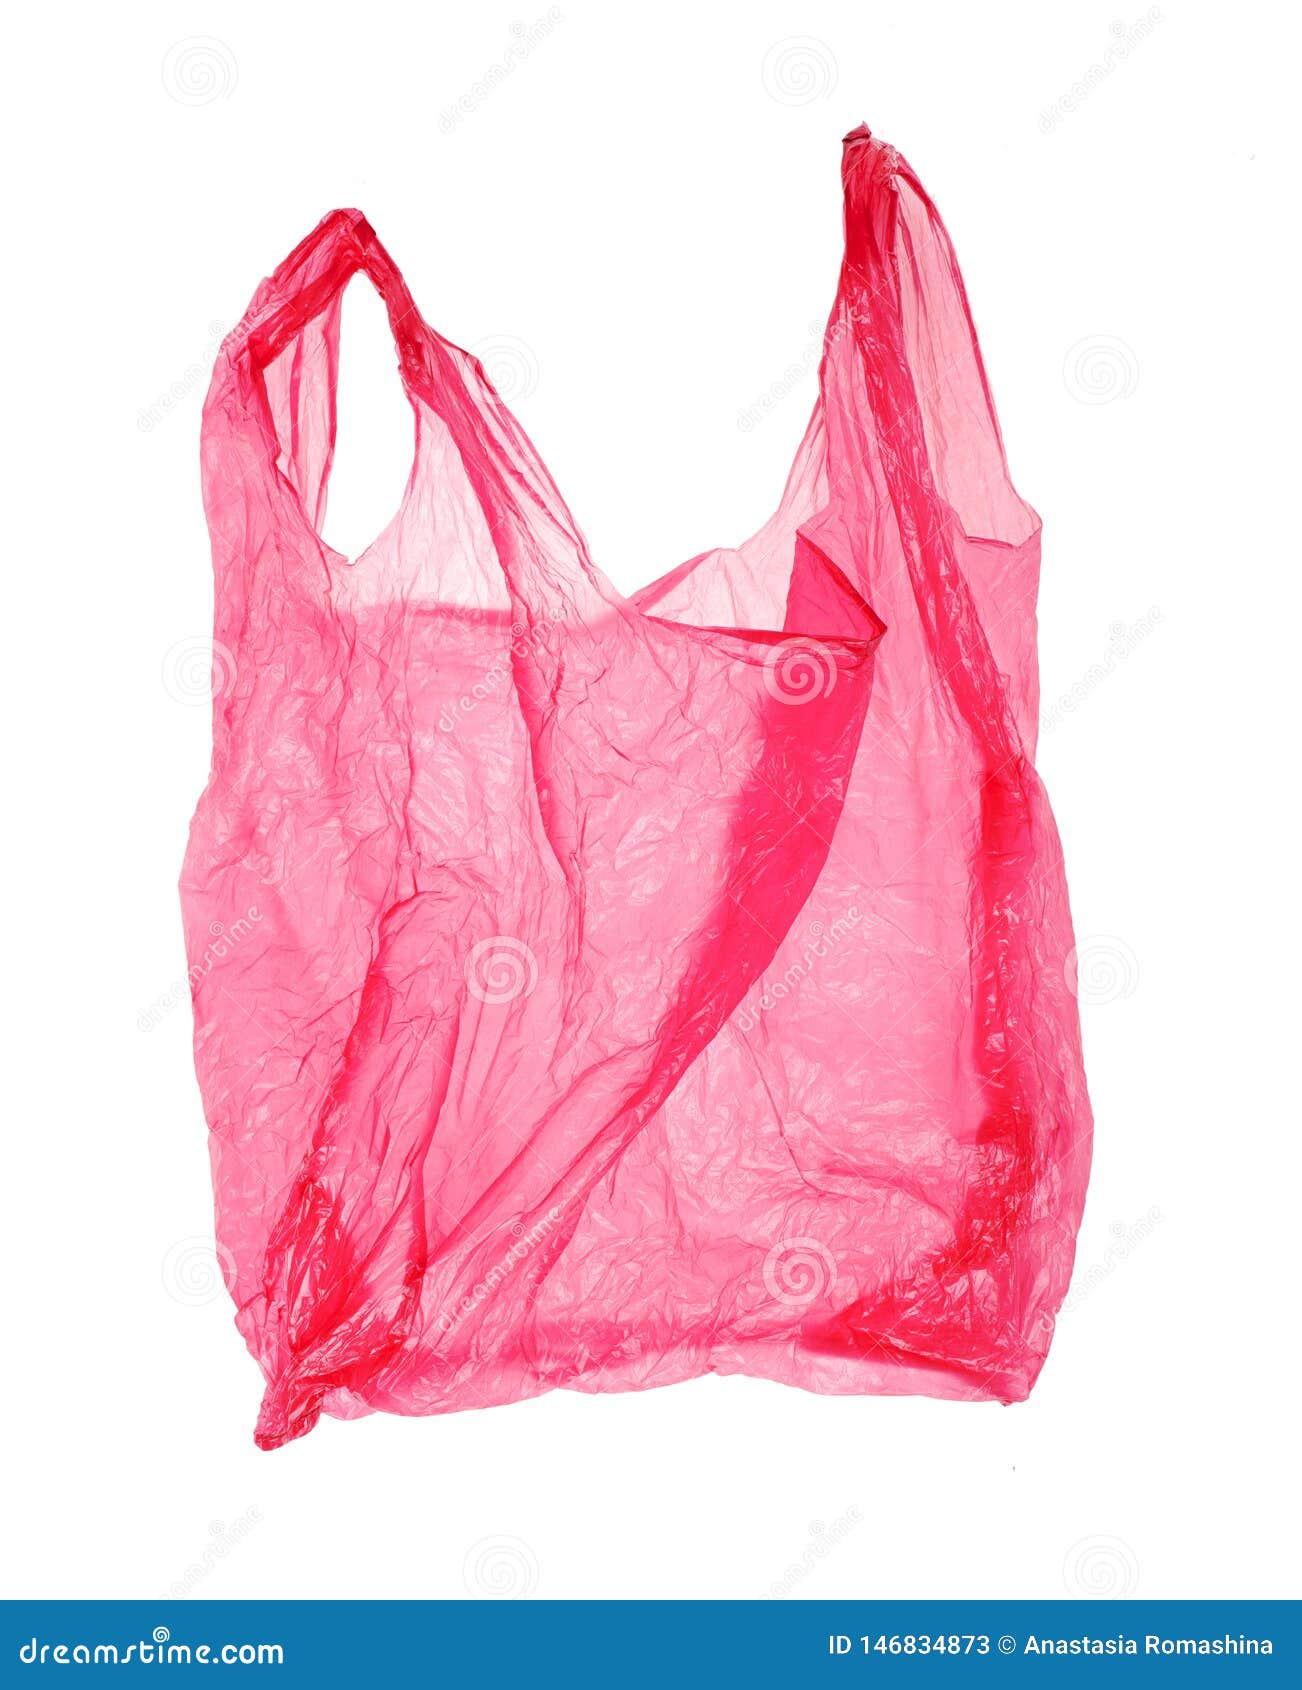 https://thumbs.dreamstime.com/z/red-pink-plastic-bag-white-background-isolated-object-146834873.jpg